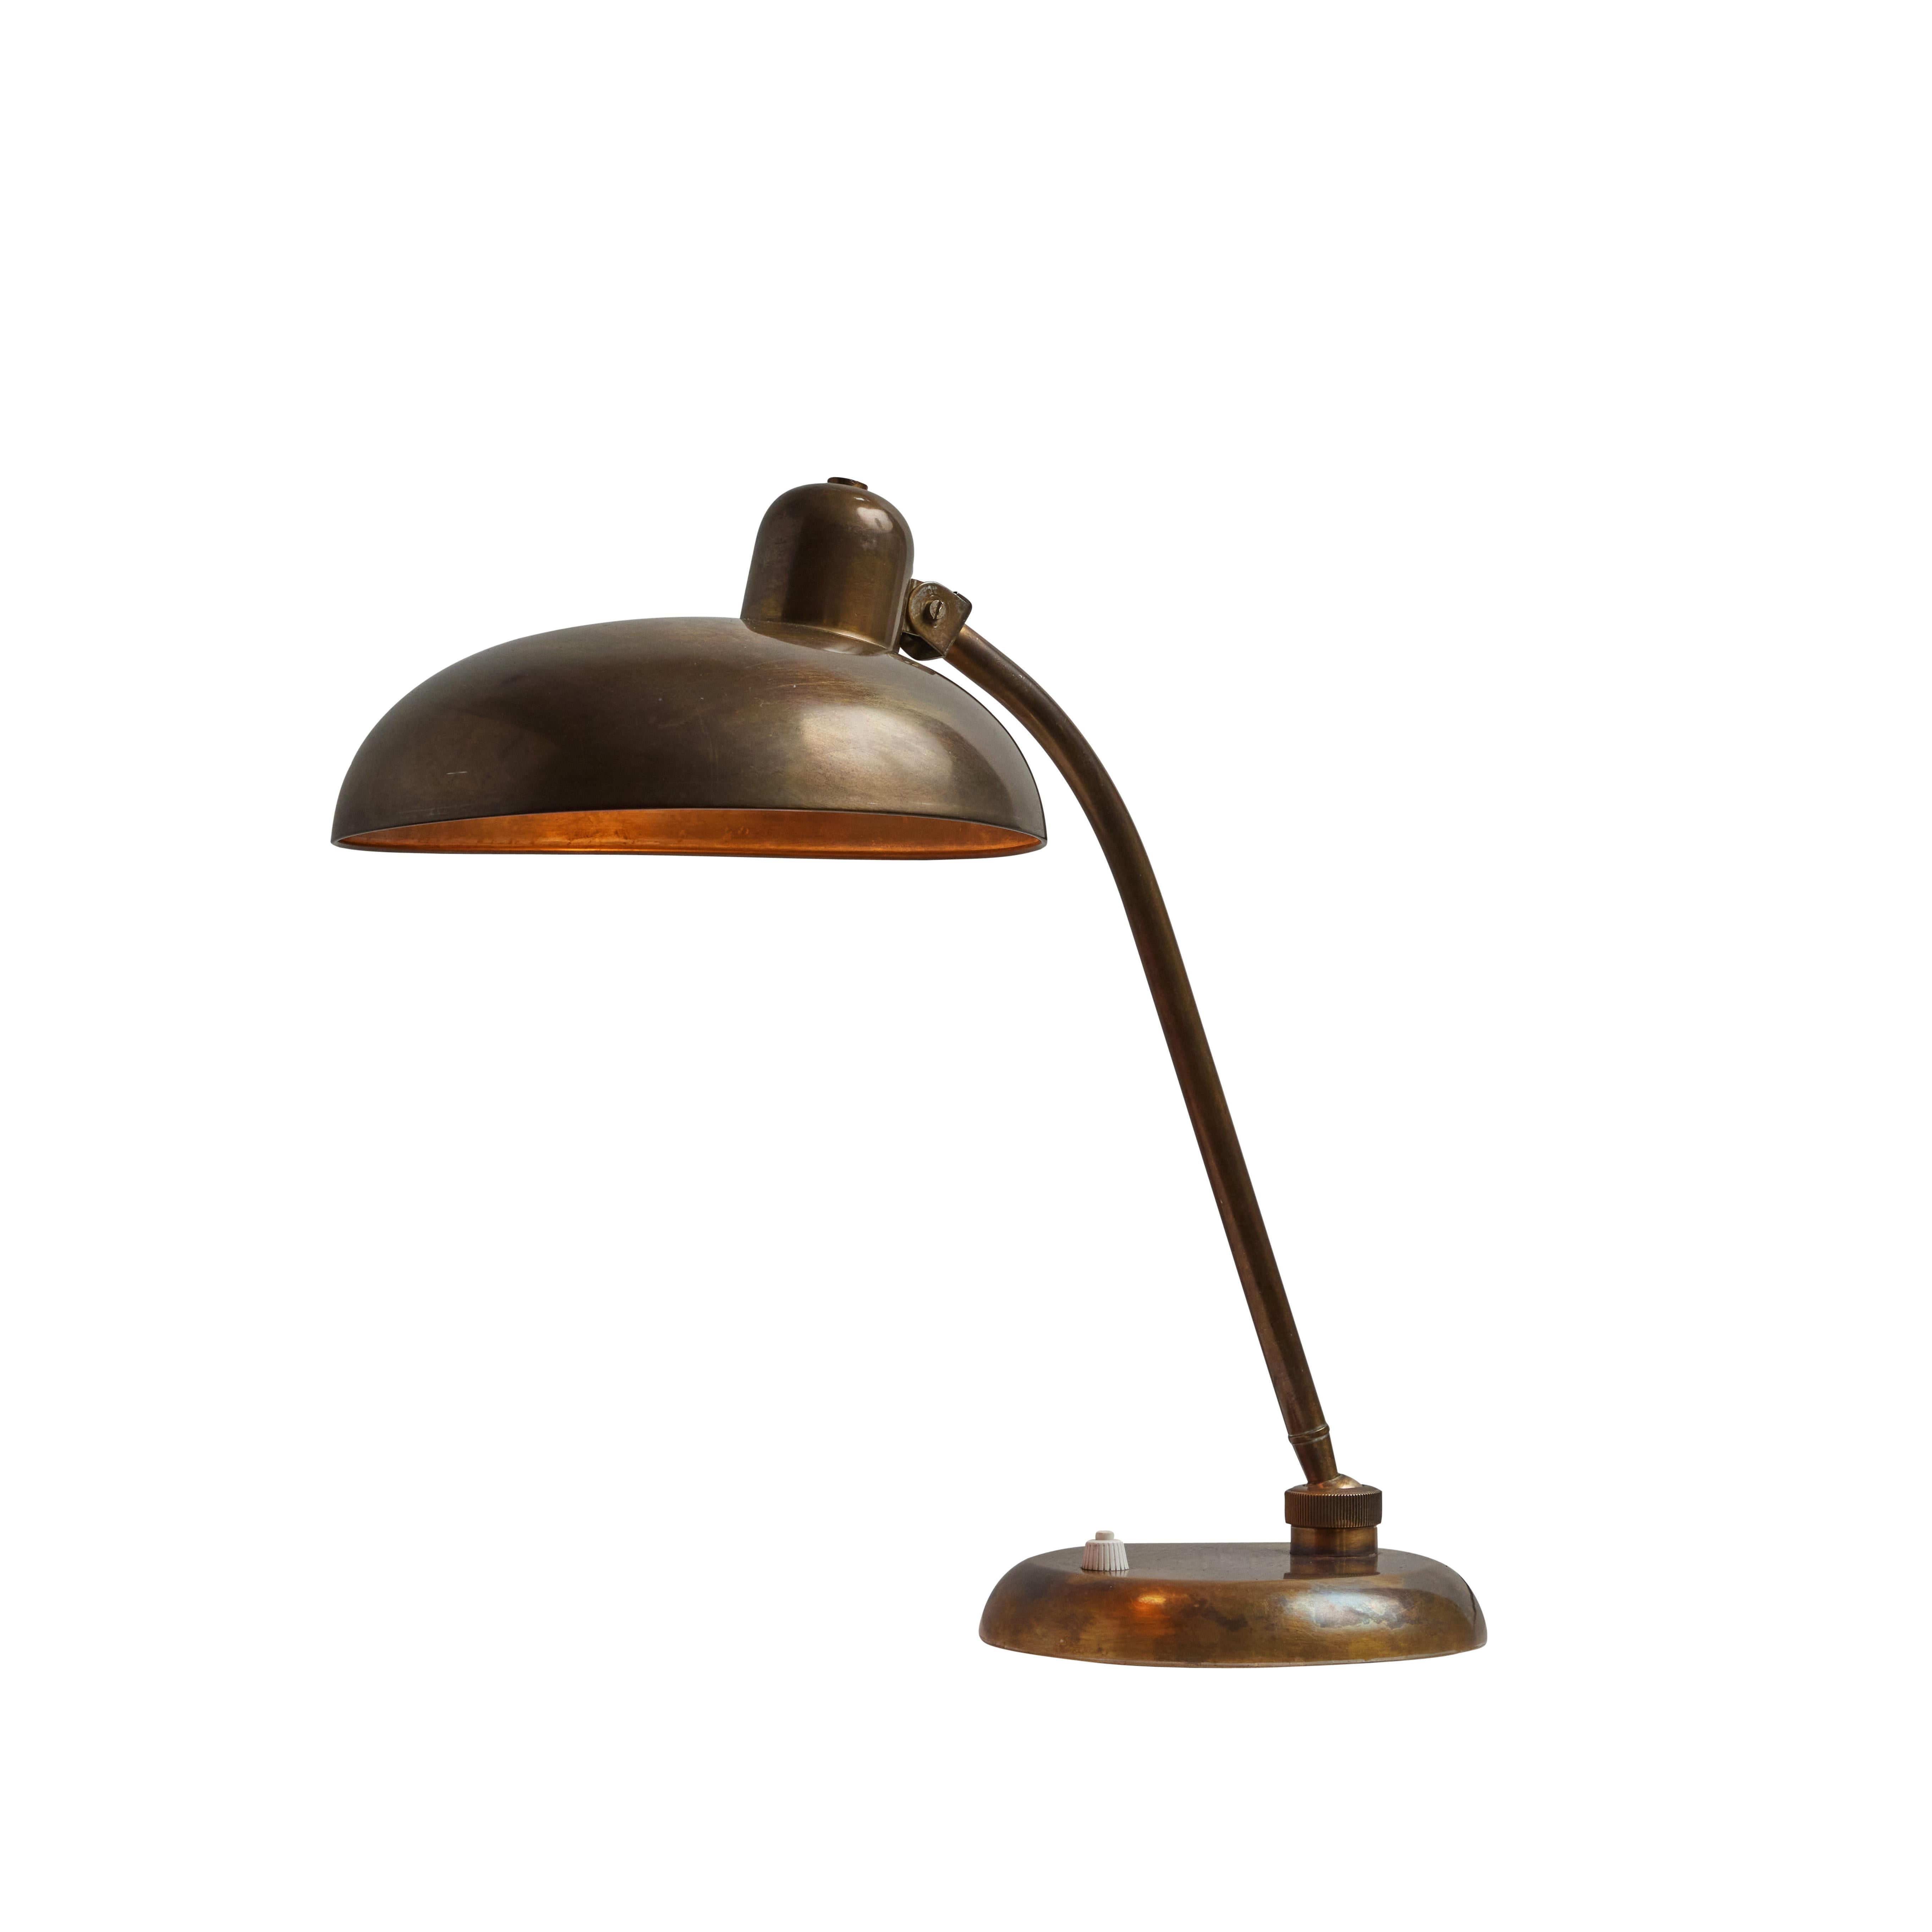 1940s Giovanni Michelucci Patinated Brass Ministerial Table Lamp for Lariolux For Sale 7